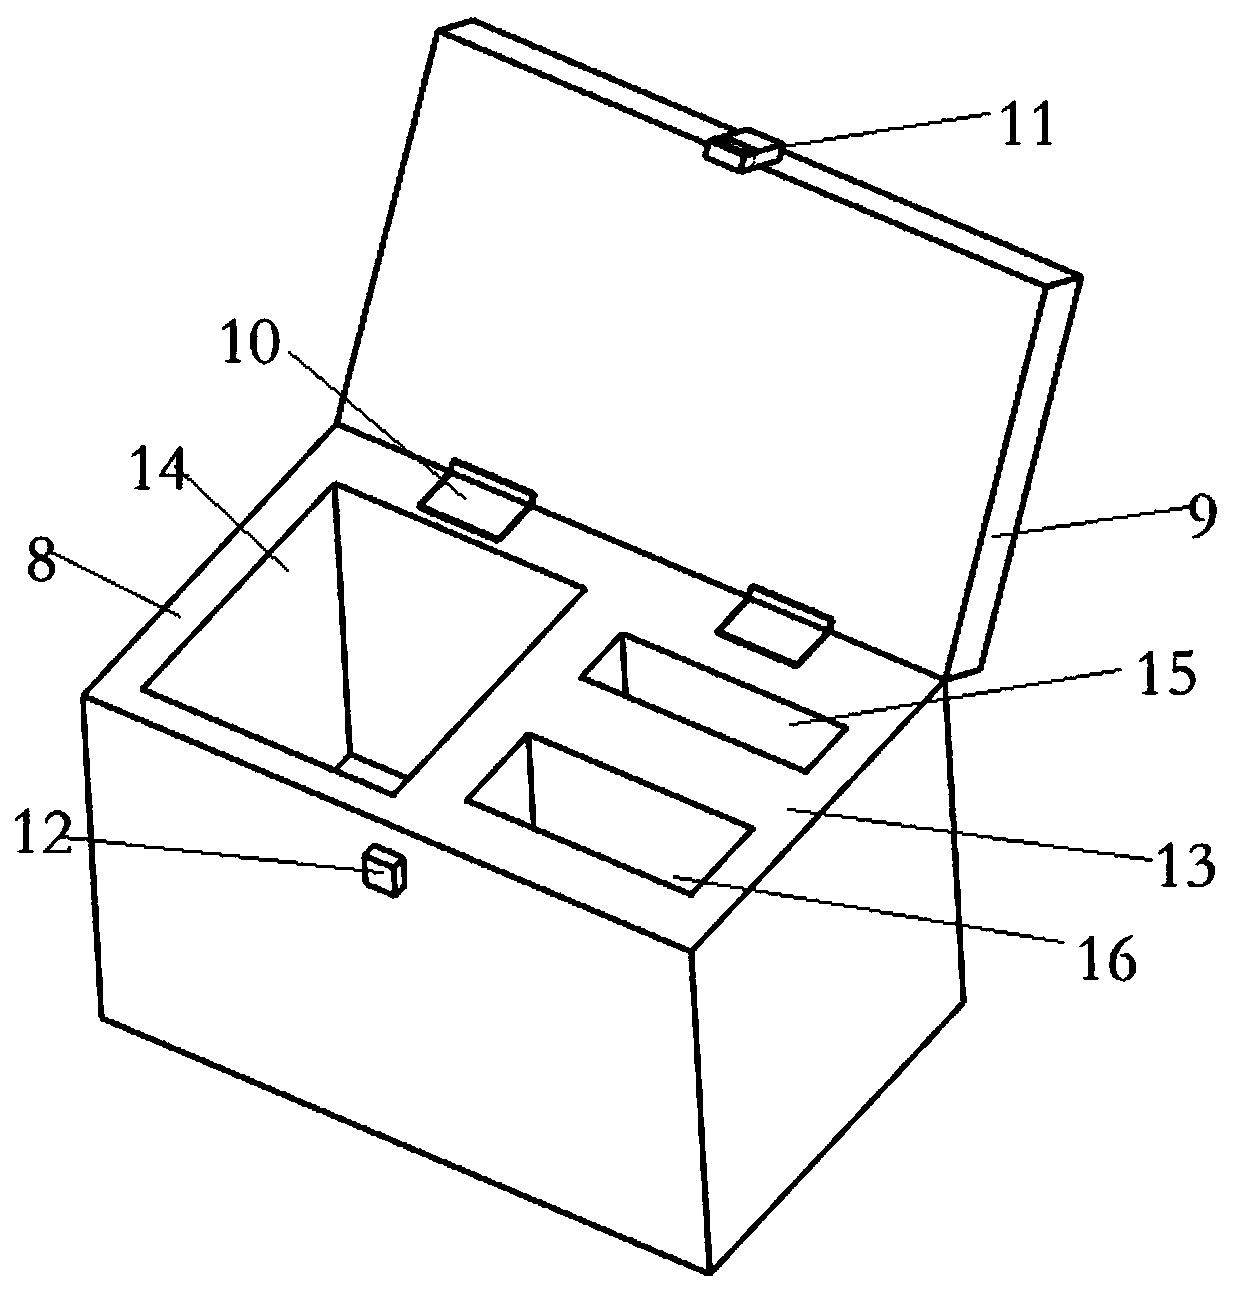 Nursing box for cleaning wounds and control method of nursing box